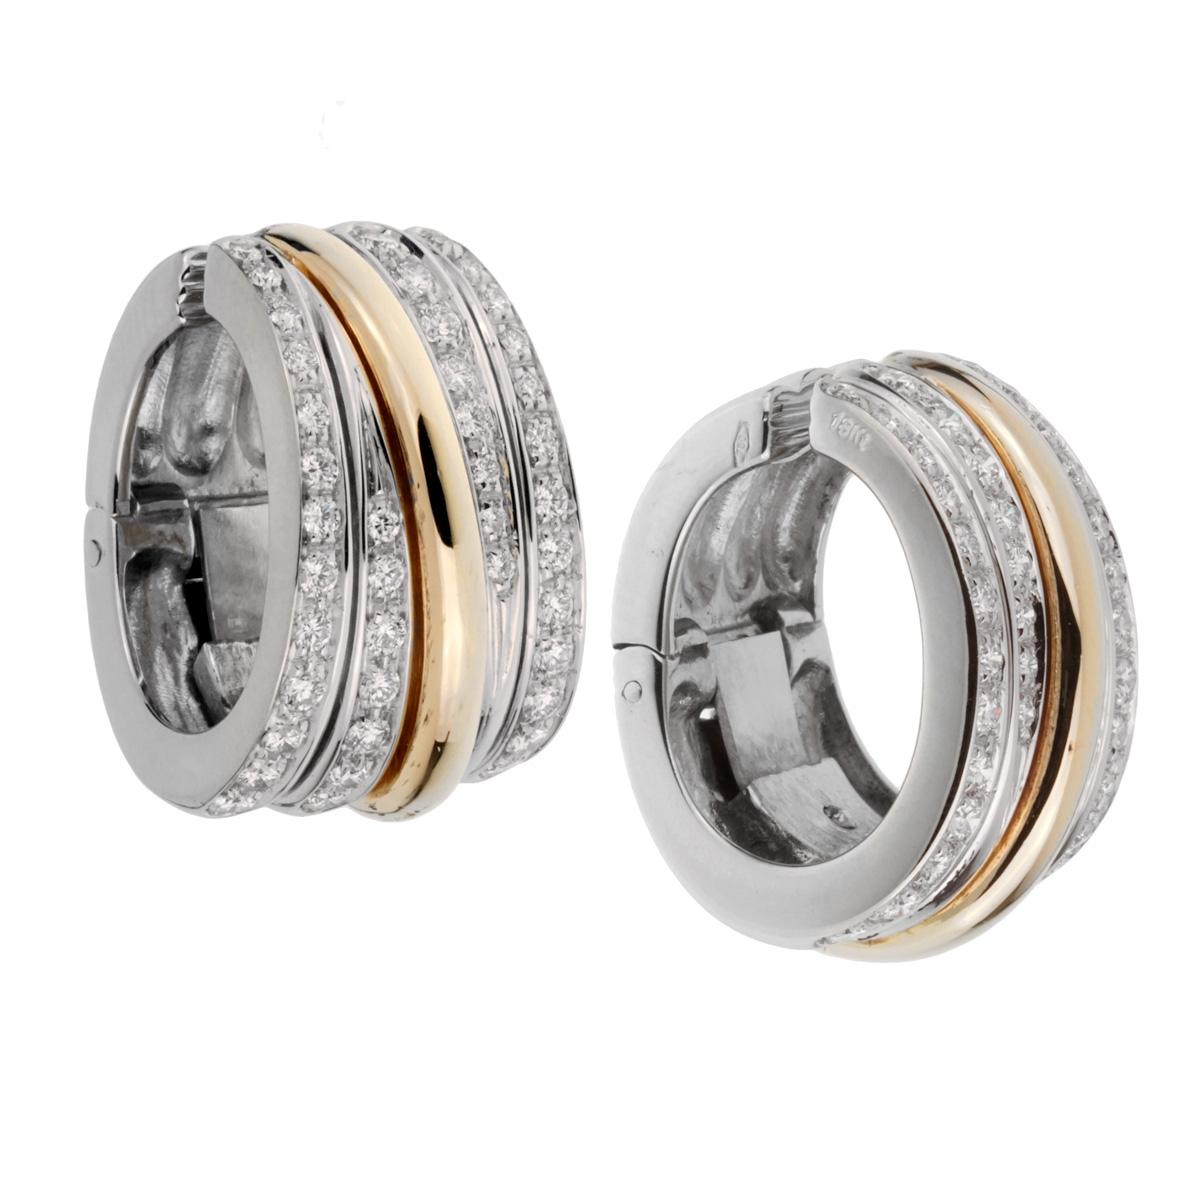 A chic set of Pomellato diamond clip on earrings featuring 18k white and yellow gold with magnificent round brilliant cut diamonds.